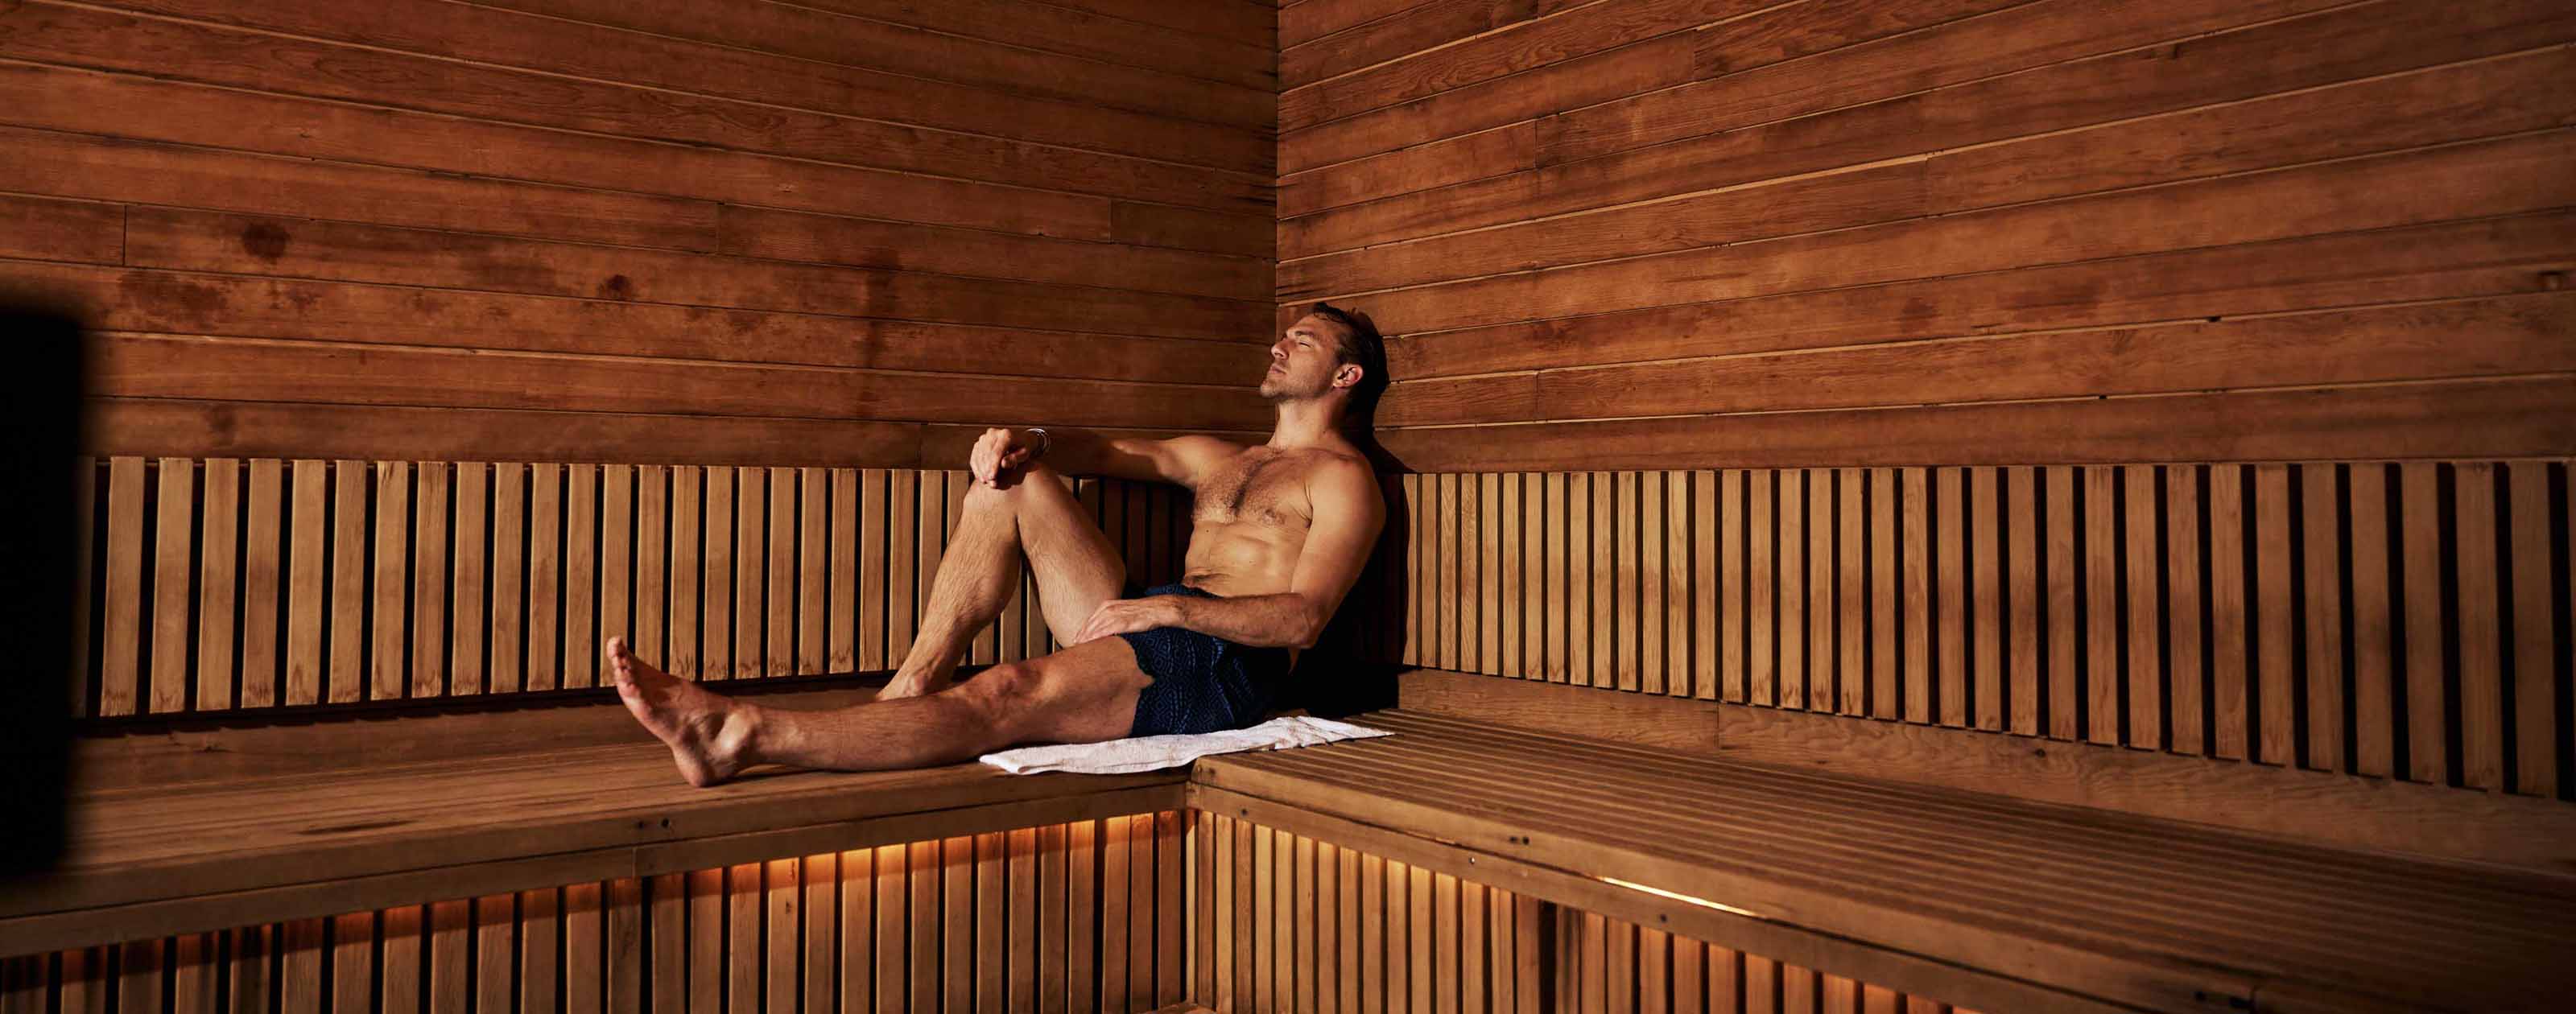 a man relaxes in a wood sauna